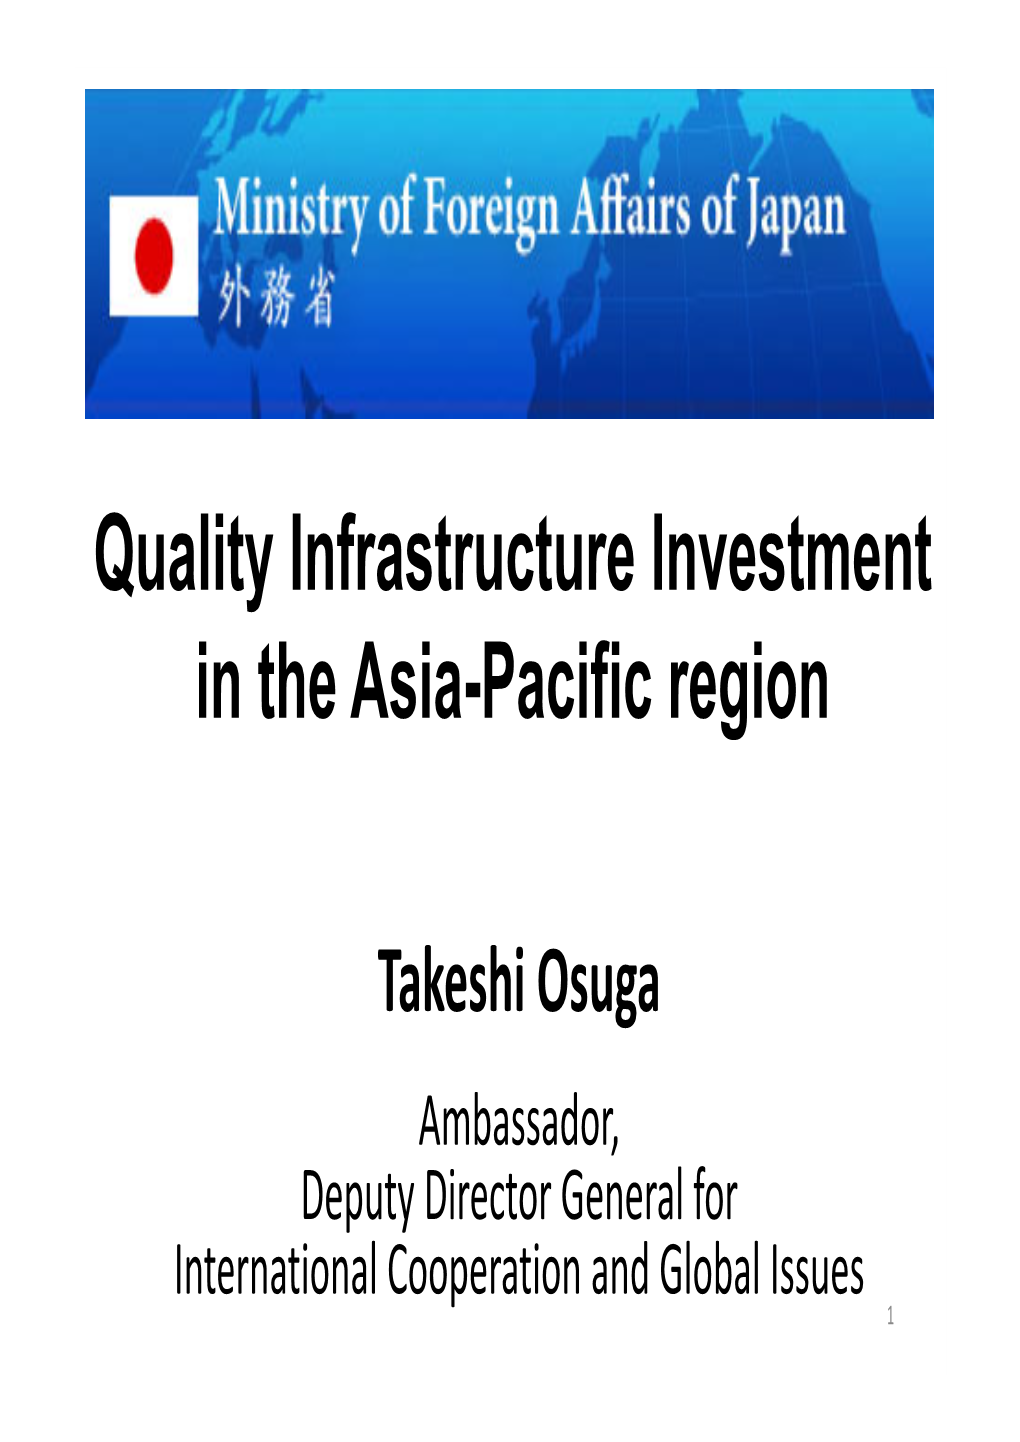 Quality Infrastructure Investment in the Asia-Pacific Region